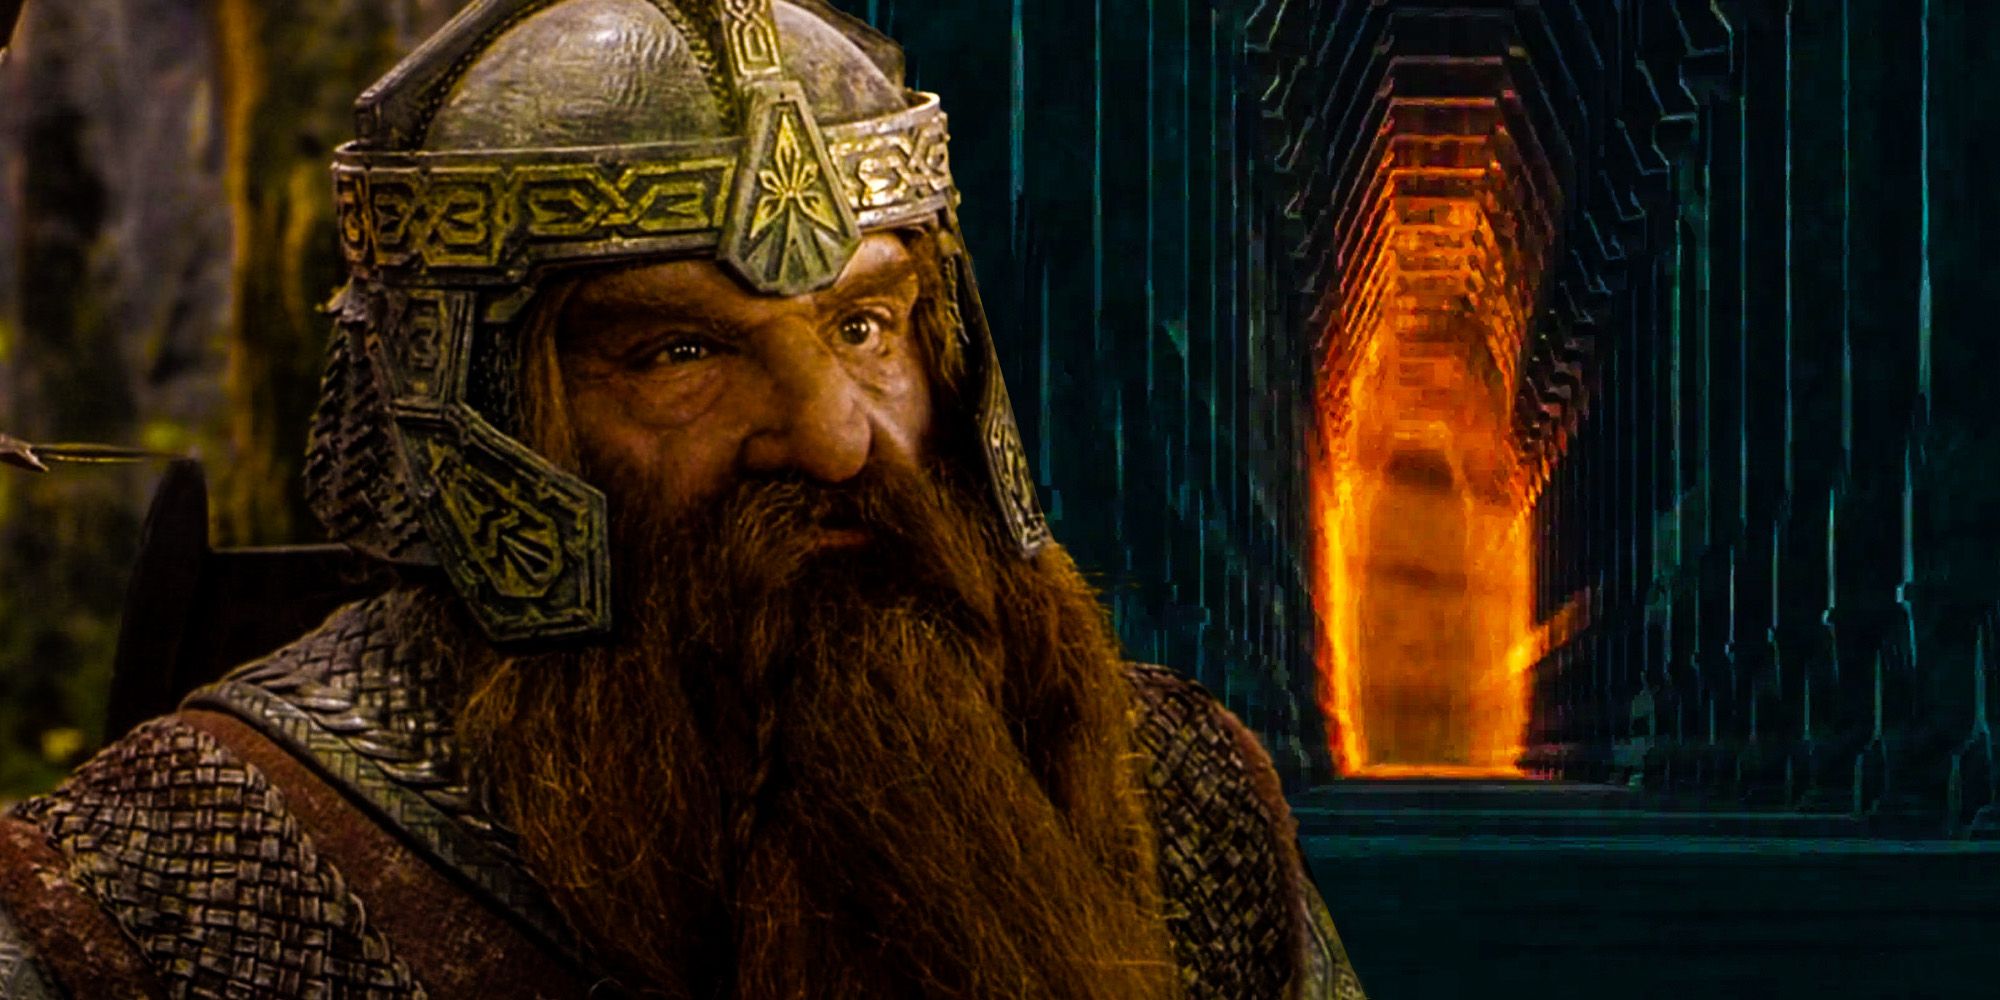 LoTR: A Bad Place to Dig Too Greedily and Too Deep – The Khazad